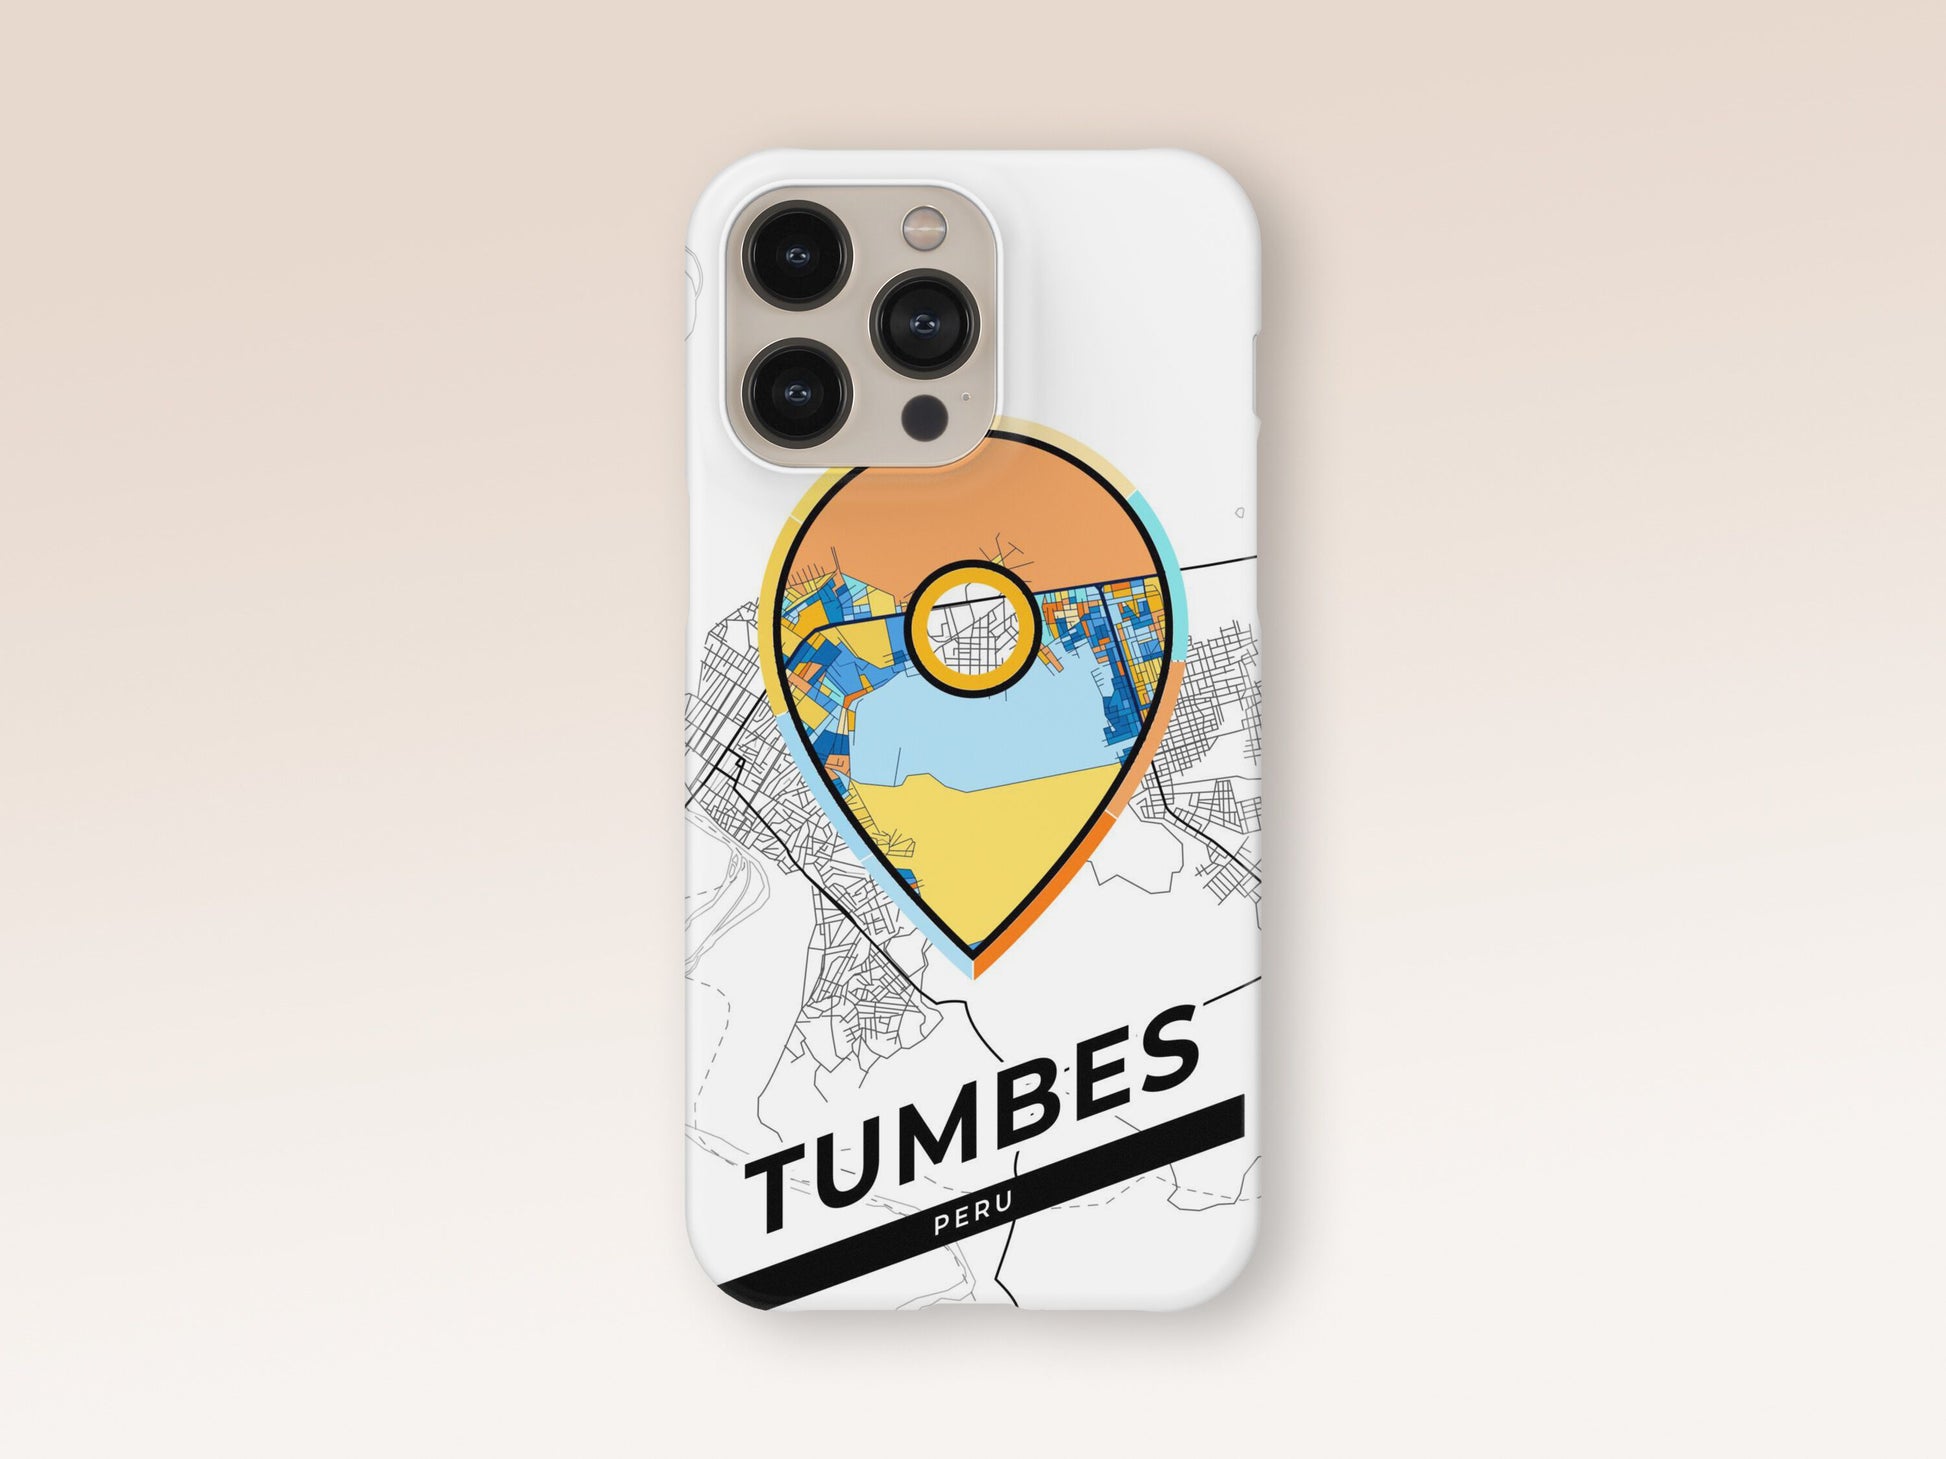 Tumbes Peru slim phone case with colorful icon. Birthday, wedding or housewarming gift. Couple match cases. 1